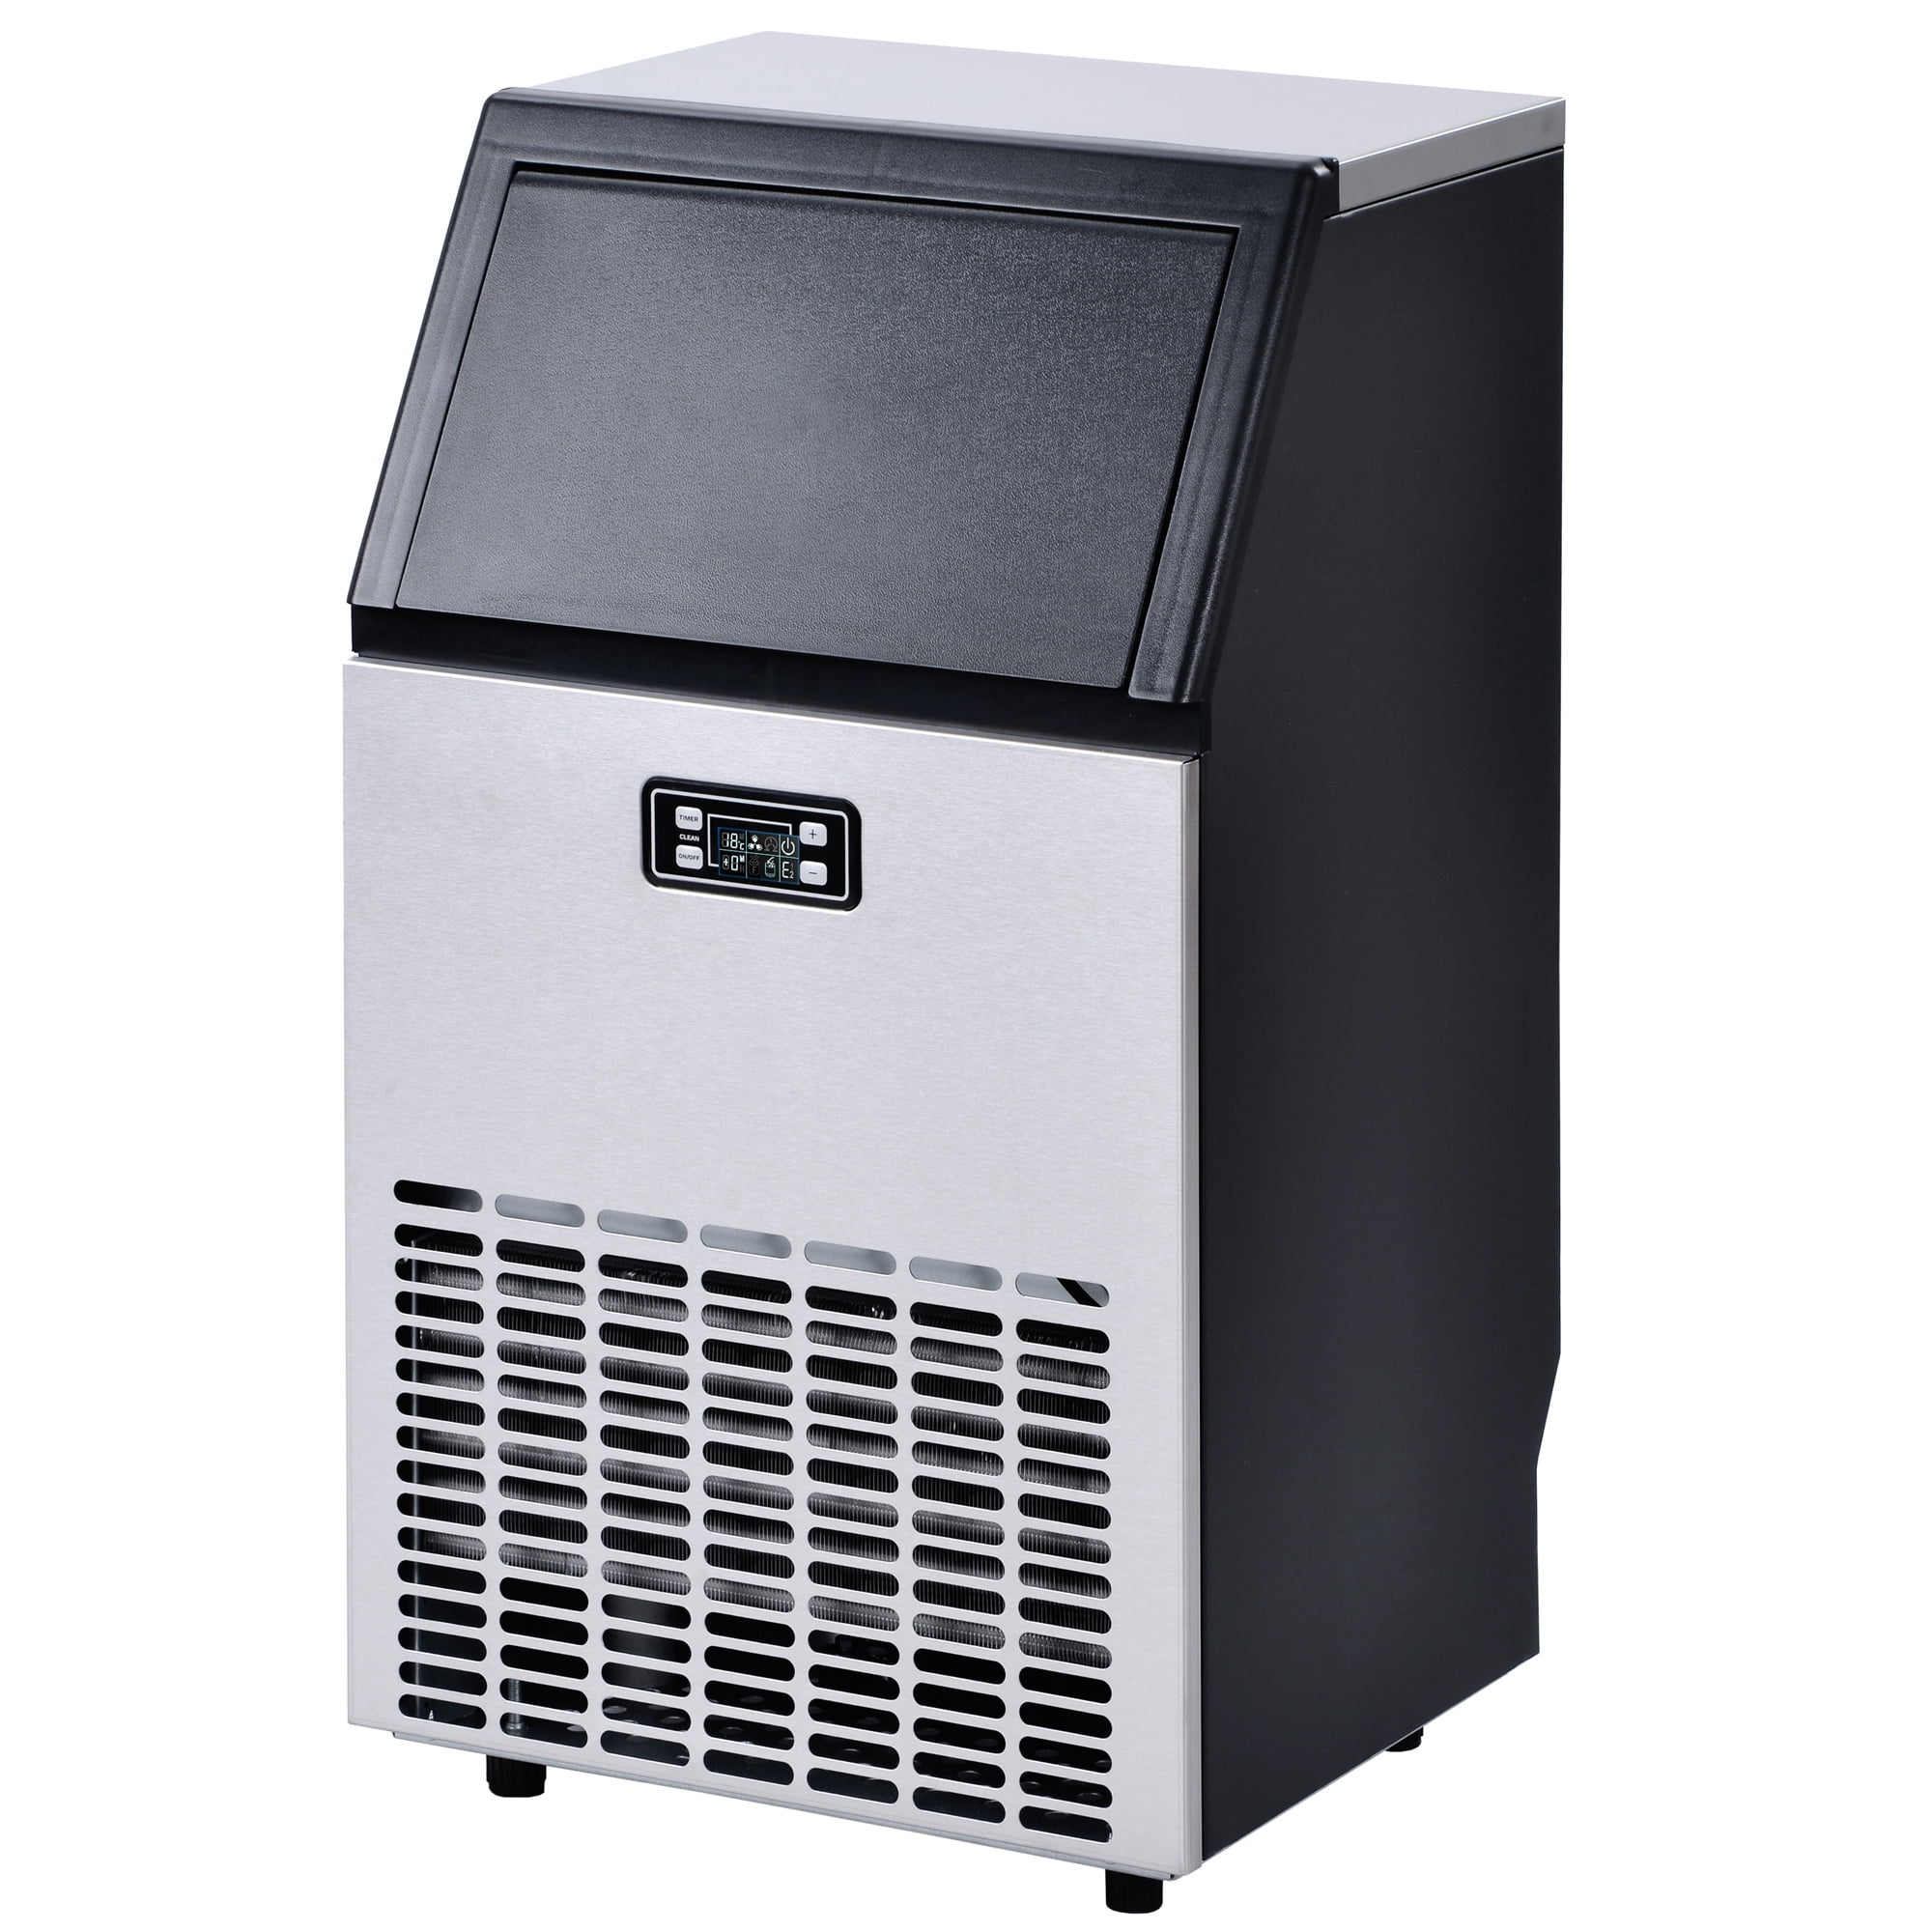 Della Stainless Steel Commercial Ice Maker Undercounter Freestanding Machine 100LB/24hr 